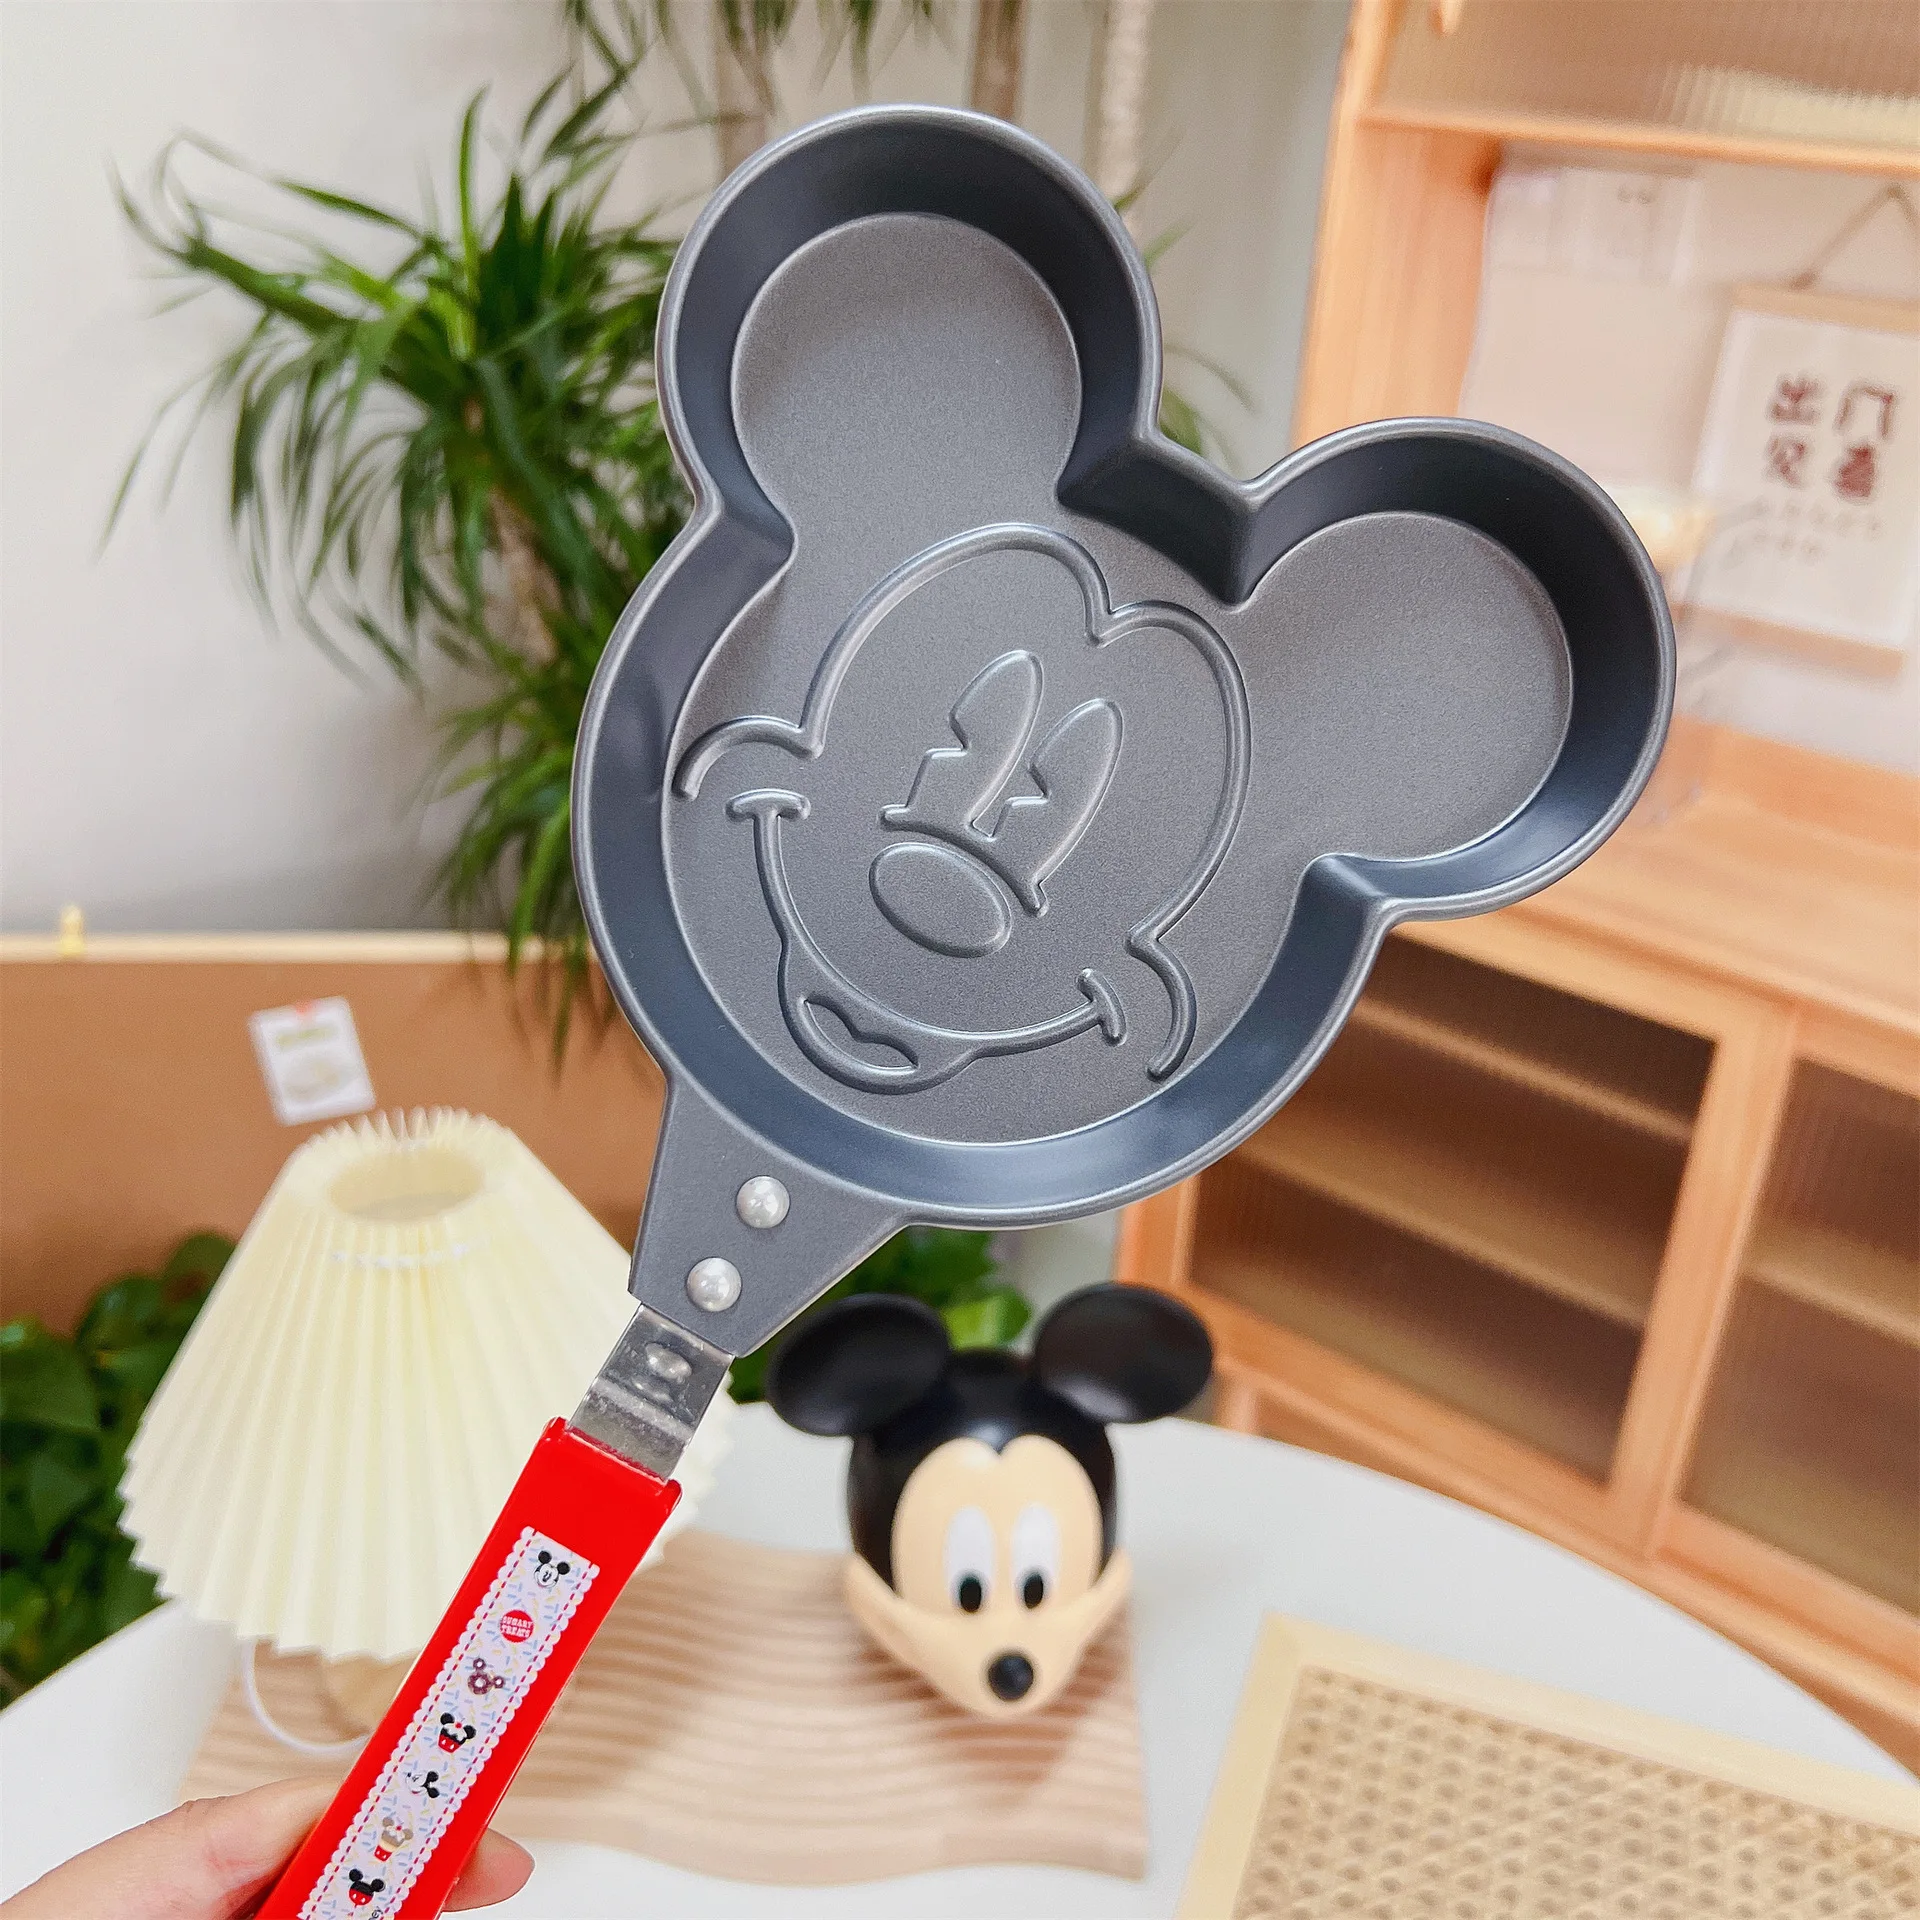 Disney Silicone Breakfast Mold Set - Mickey Mouse Shapes